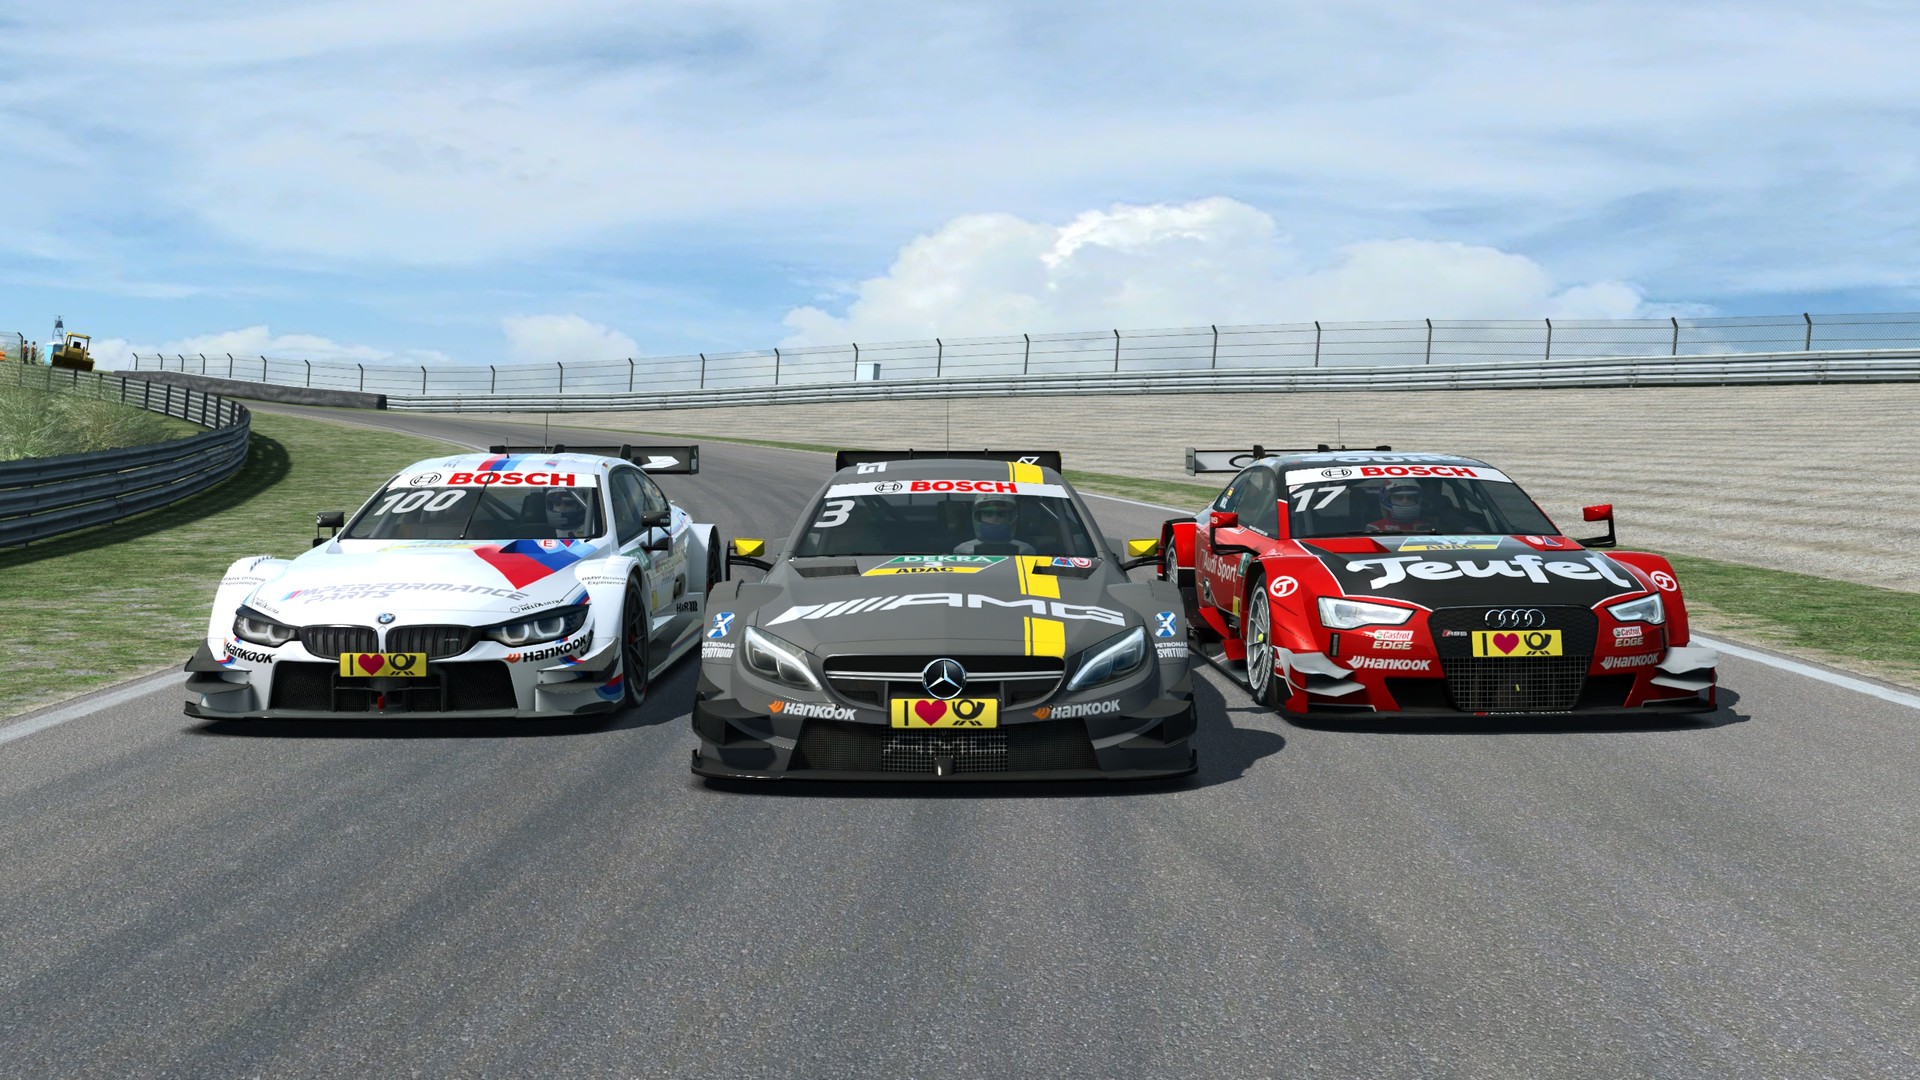 Best racing games - three cars astride race on a track towards the camera